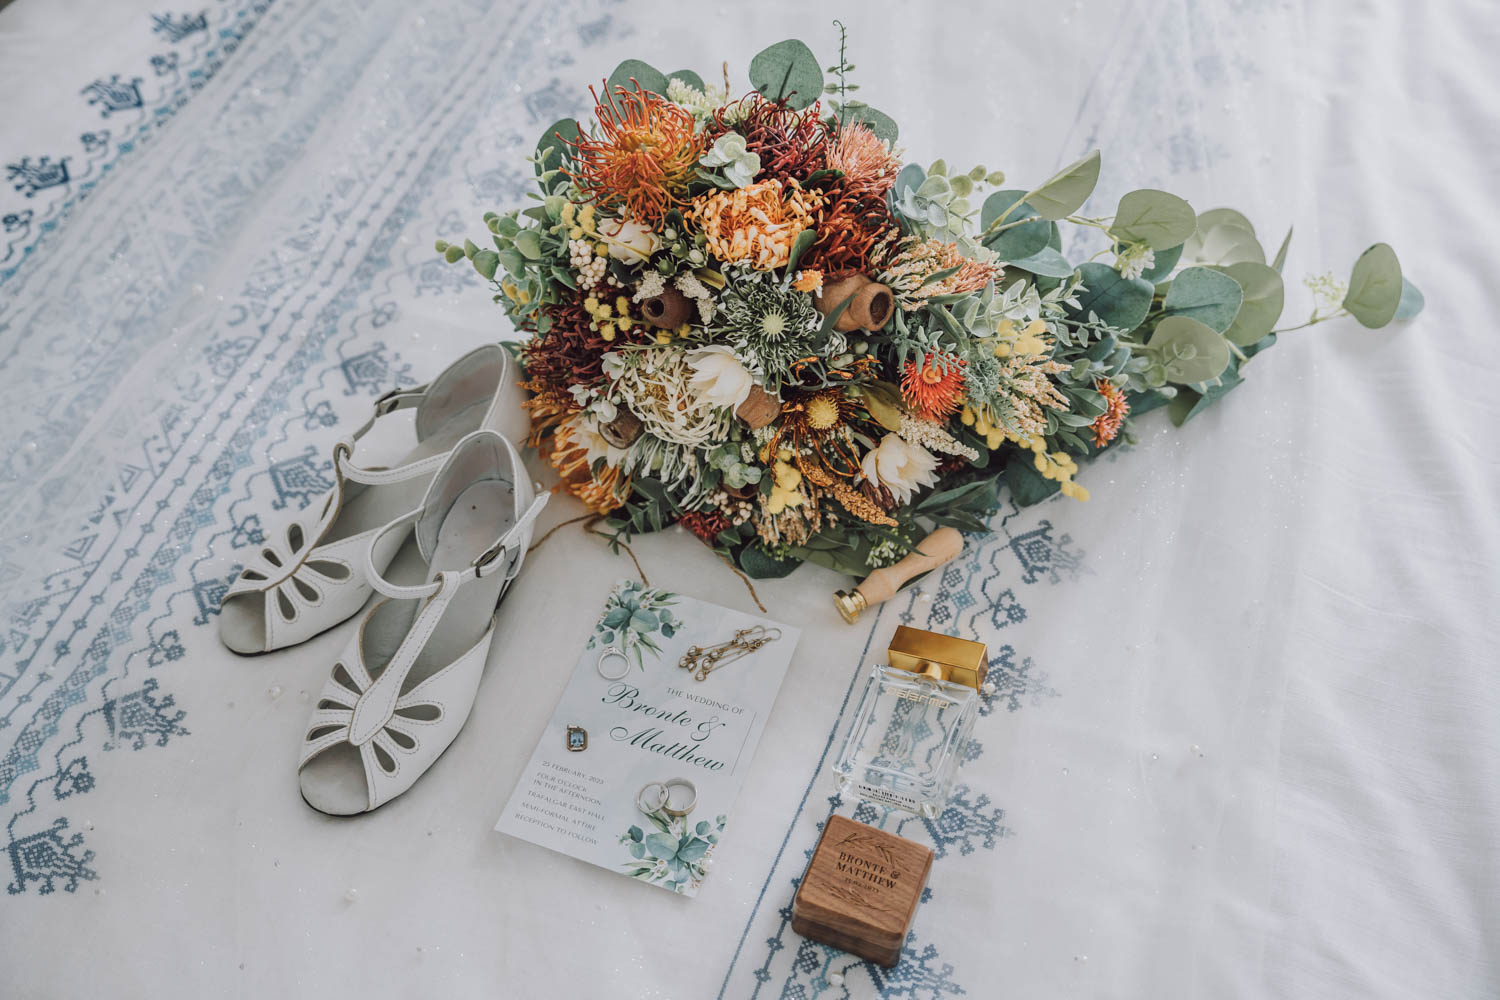 A beautifully arranged wedding photoshoot setup in Melbourne, featuring elegant bridal shoes, a vibrant bouquet, wedding invitations, and a perfume bottle, all laid out on a vintage patterned fabric.